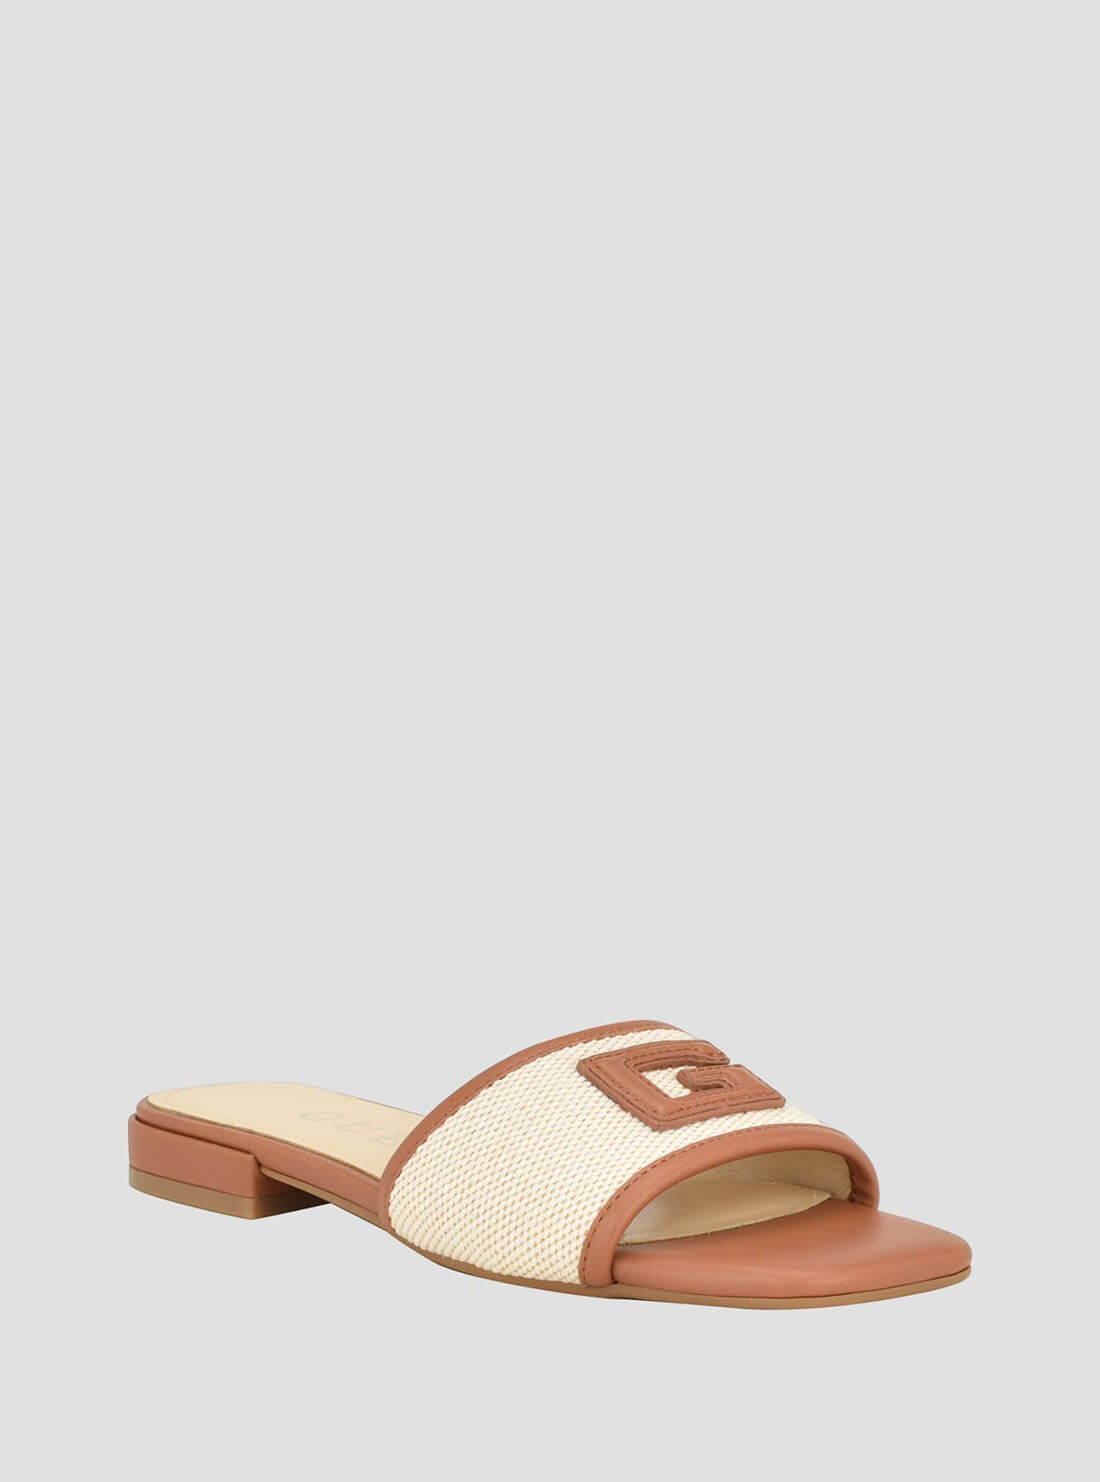 Tan Tampa Slide Sandals | GUESS Women's Shoes | front view